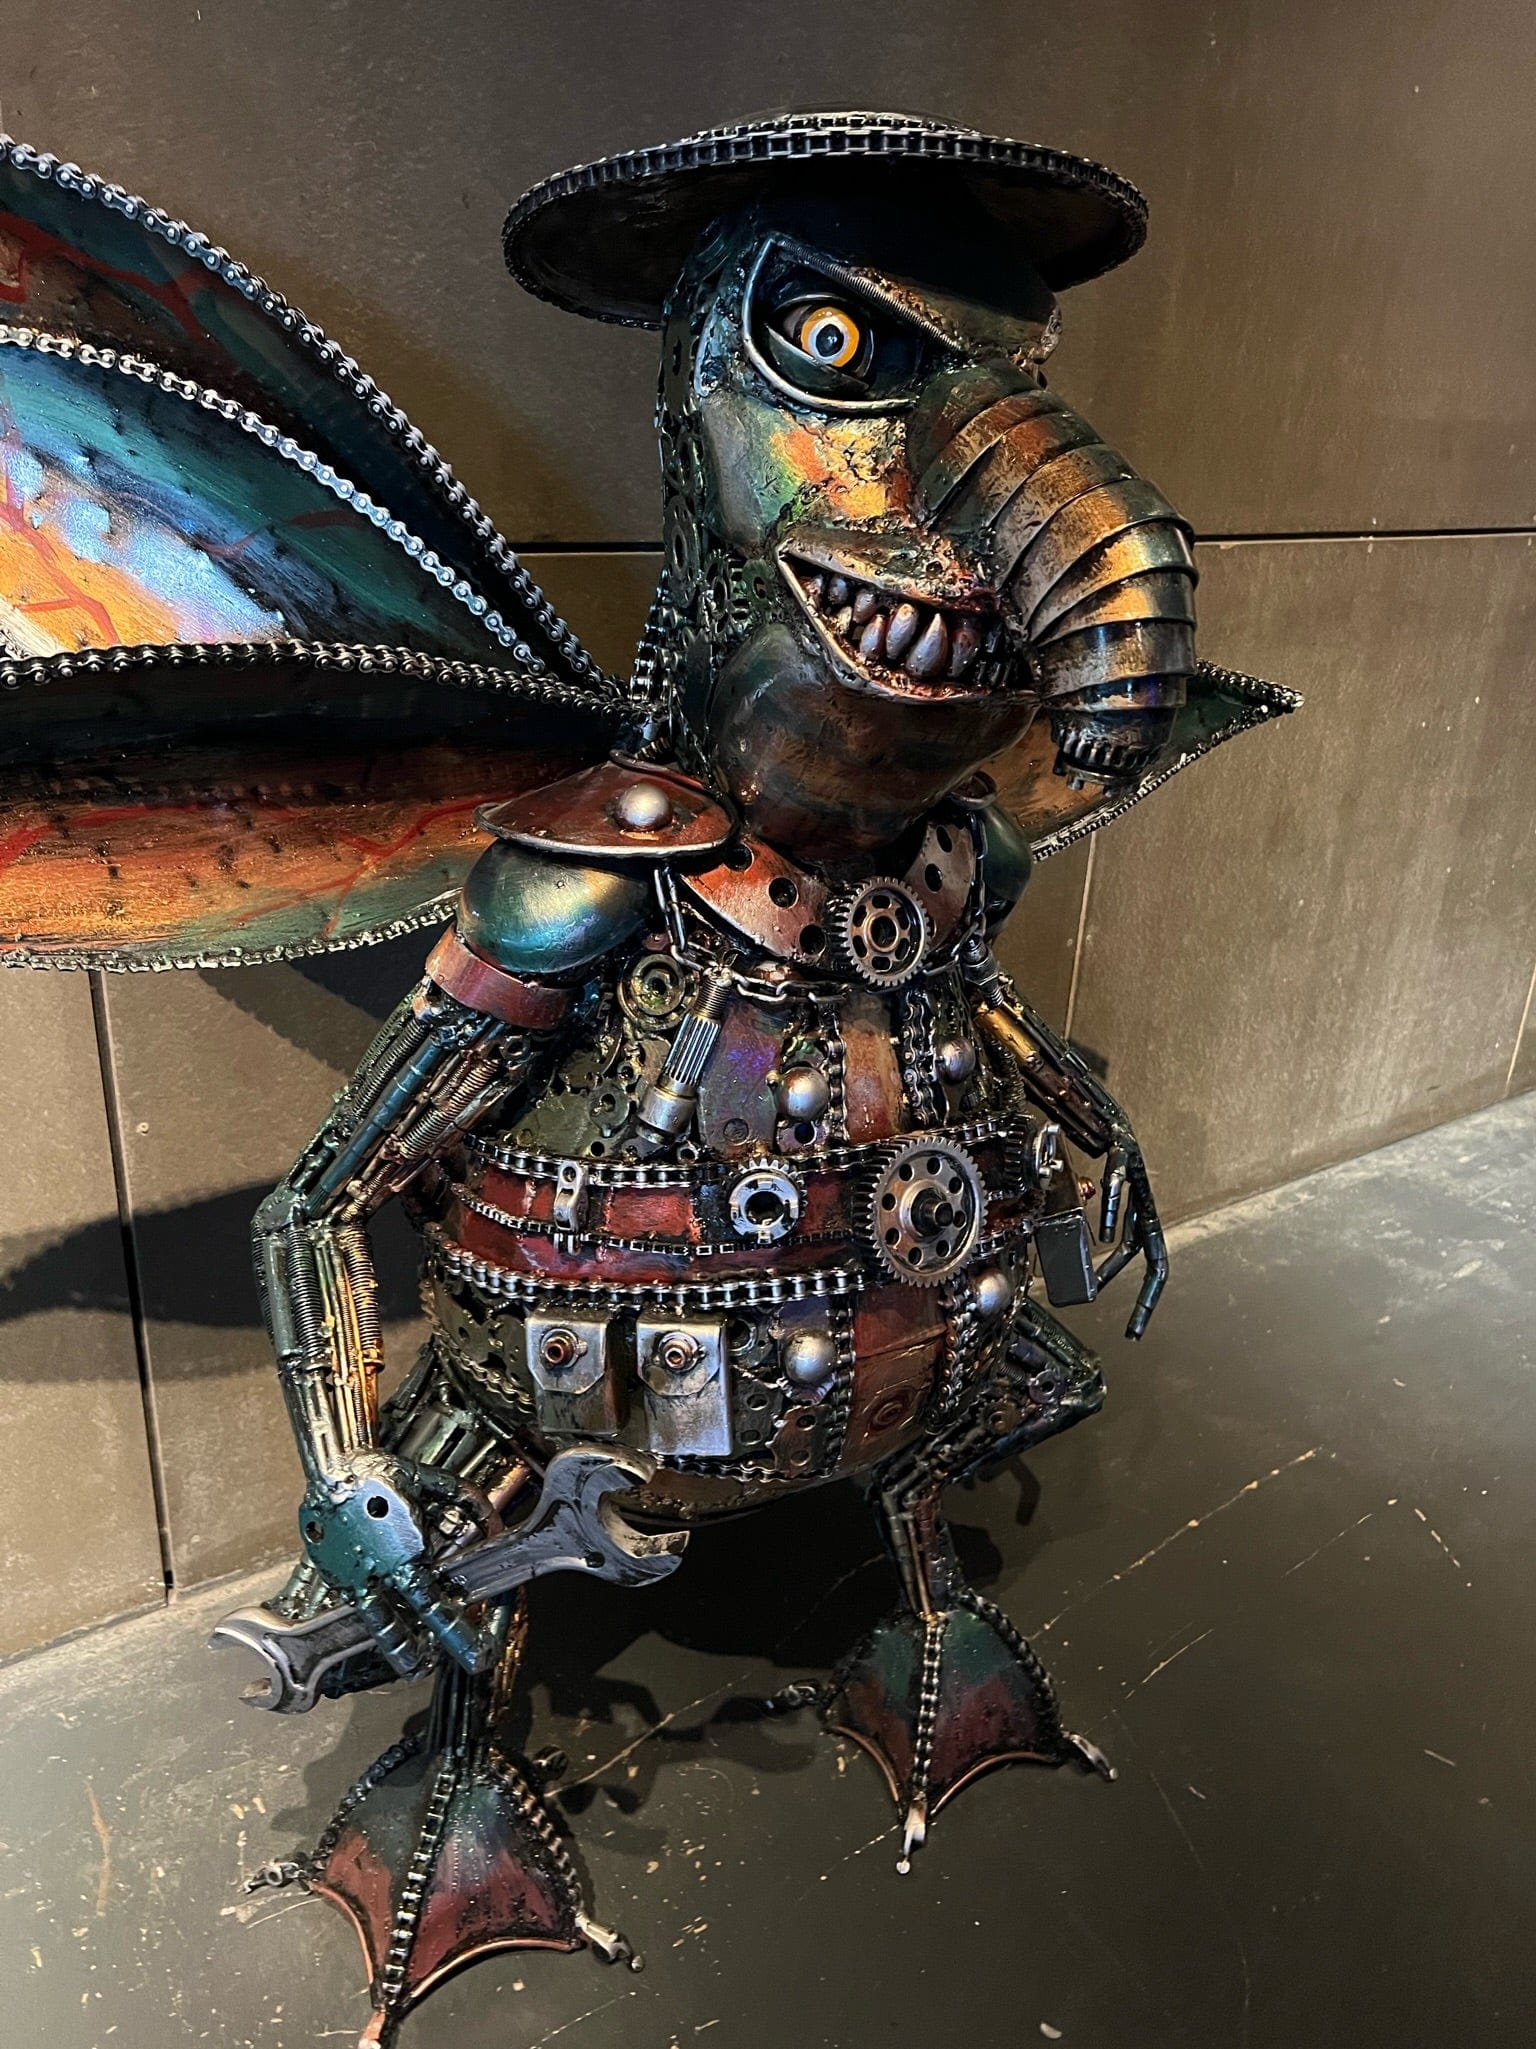 Kalifano Recycled Metal Art 44" Watto Inspired Recycled Metal Art Sculpture RMS-WATTO110-P